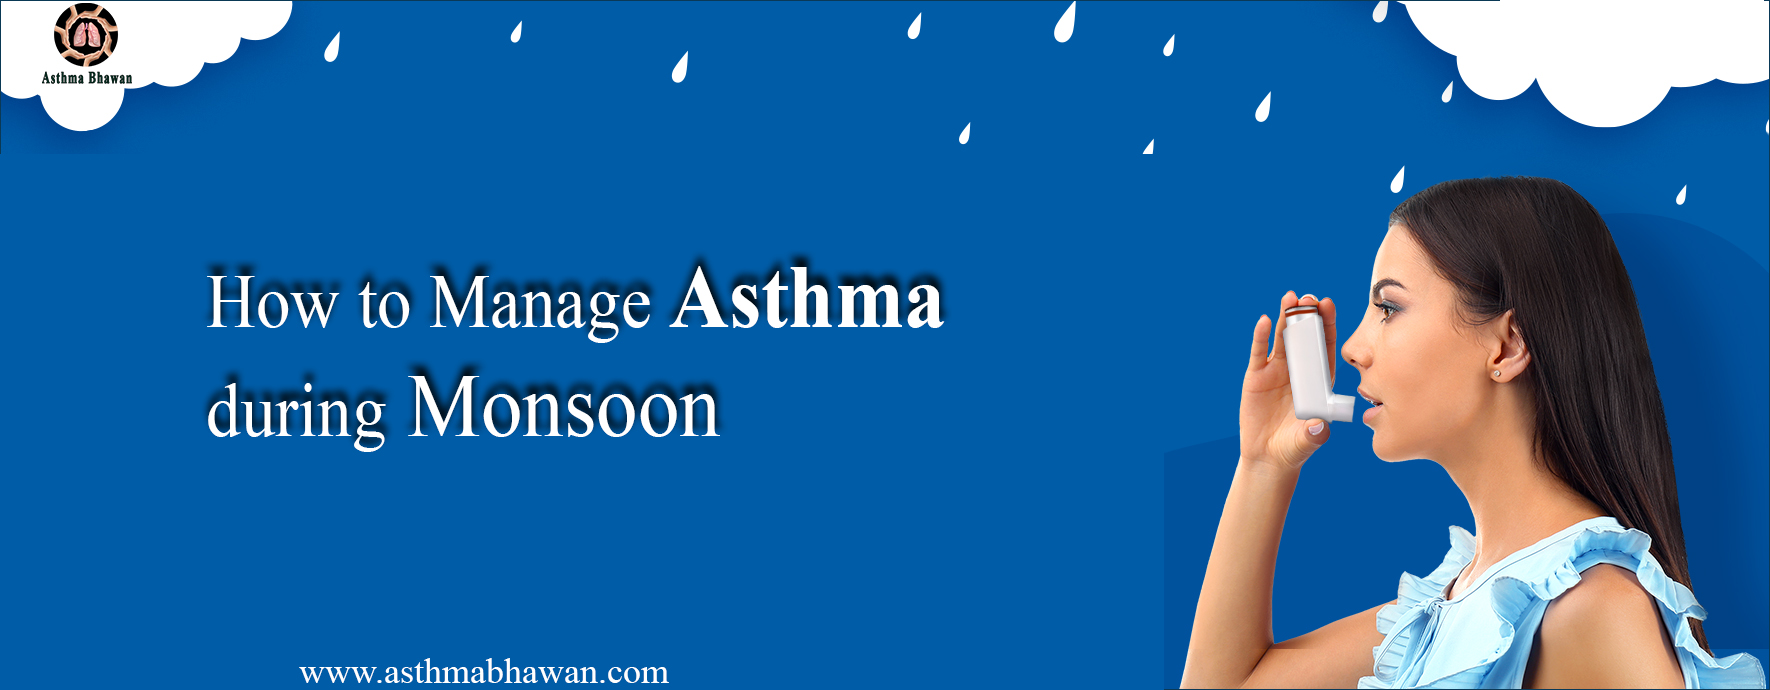 How to Manage Asthma during Monsoon - Asthma Bhawan